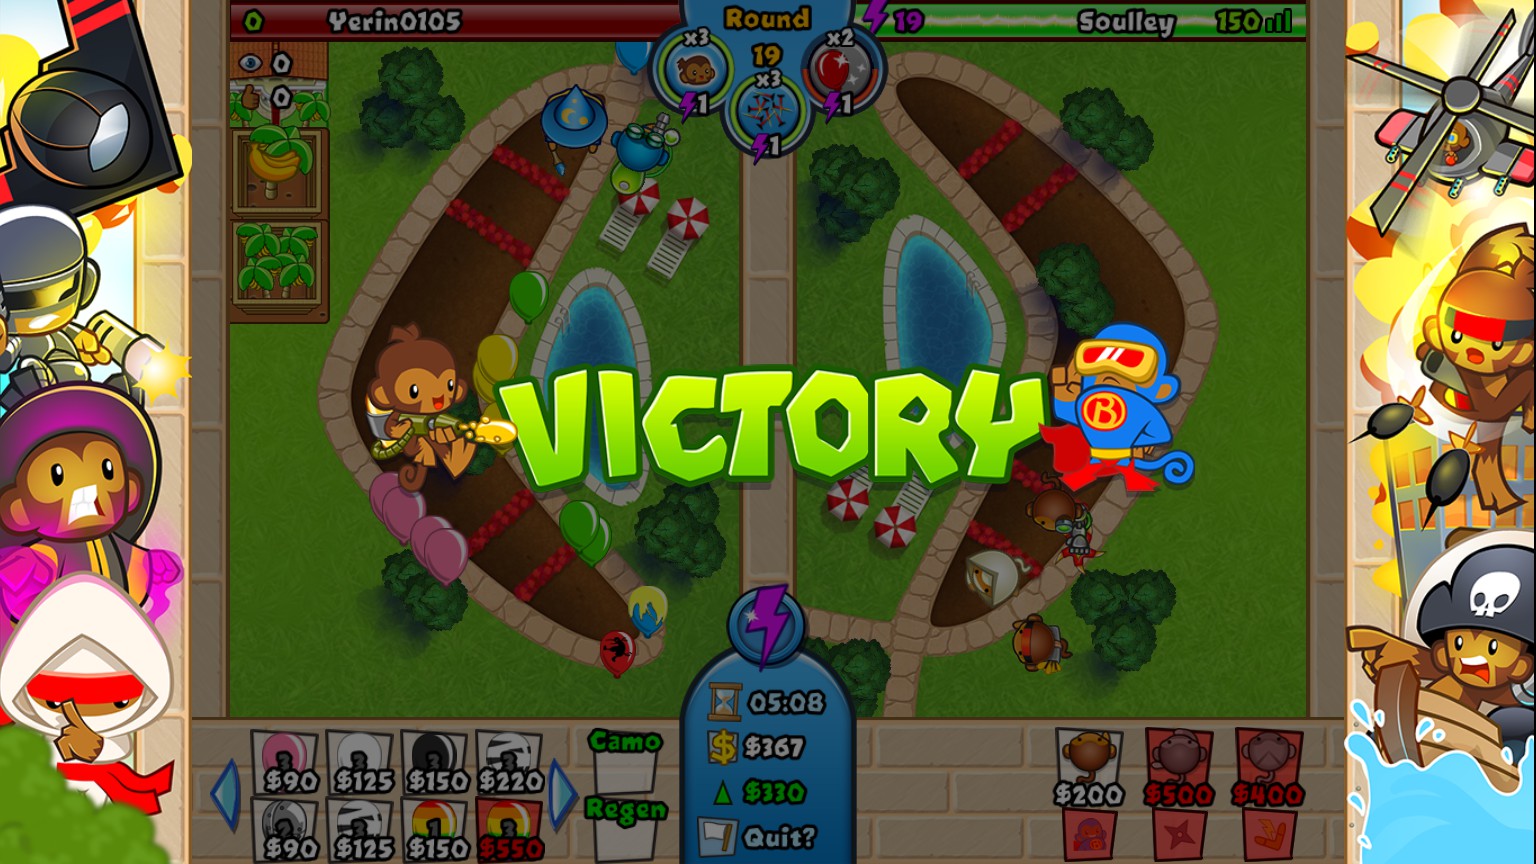 Bloons TD Battles How to Win in Game Strategy Guide - FINALE: The Strategy - F8FC5F7